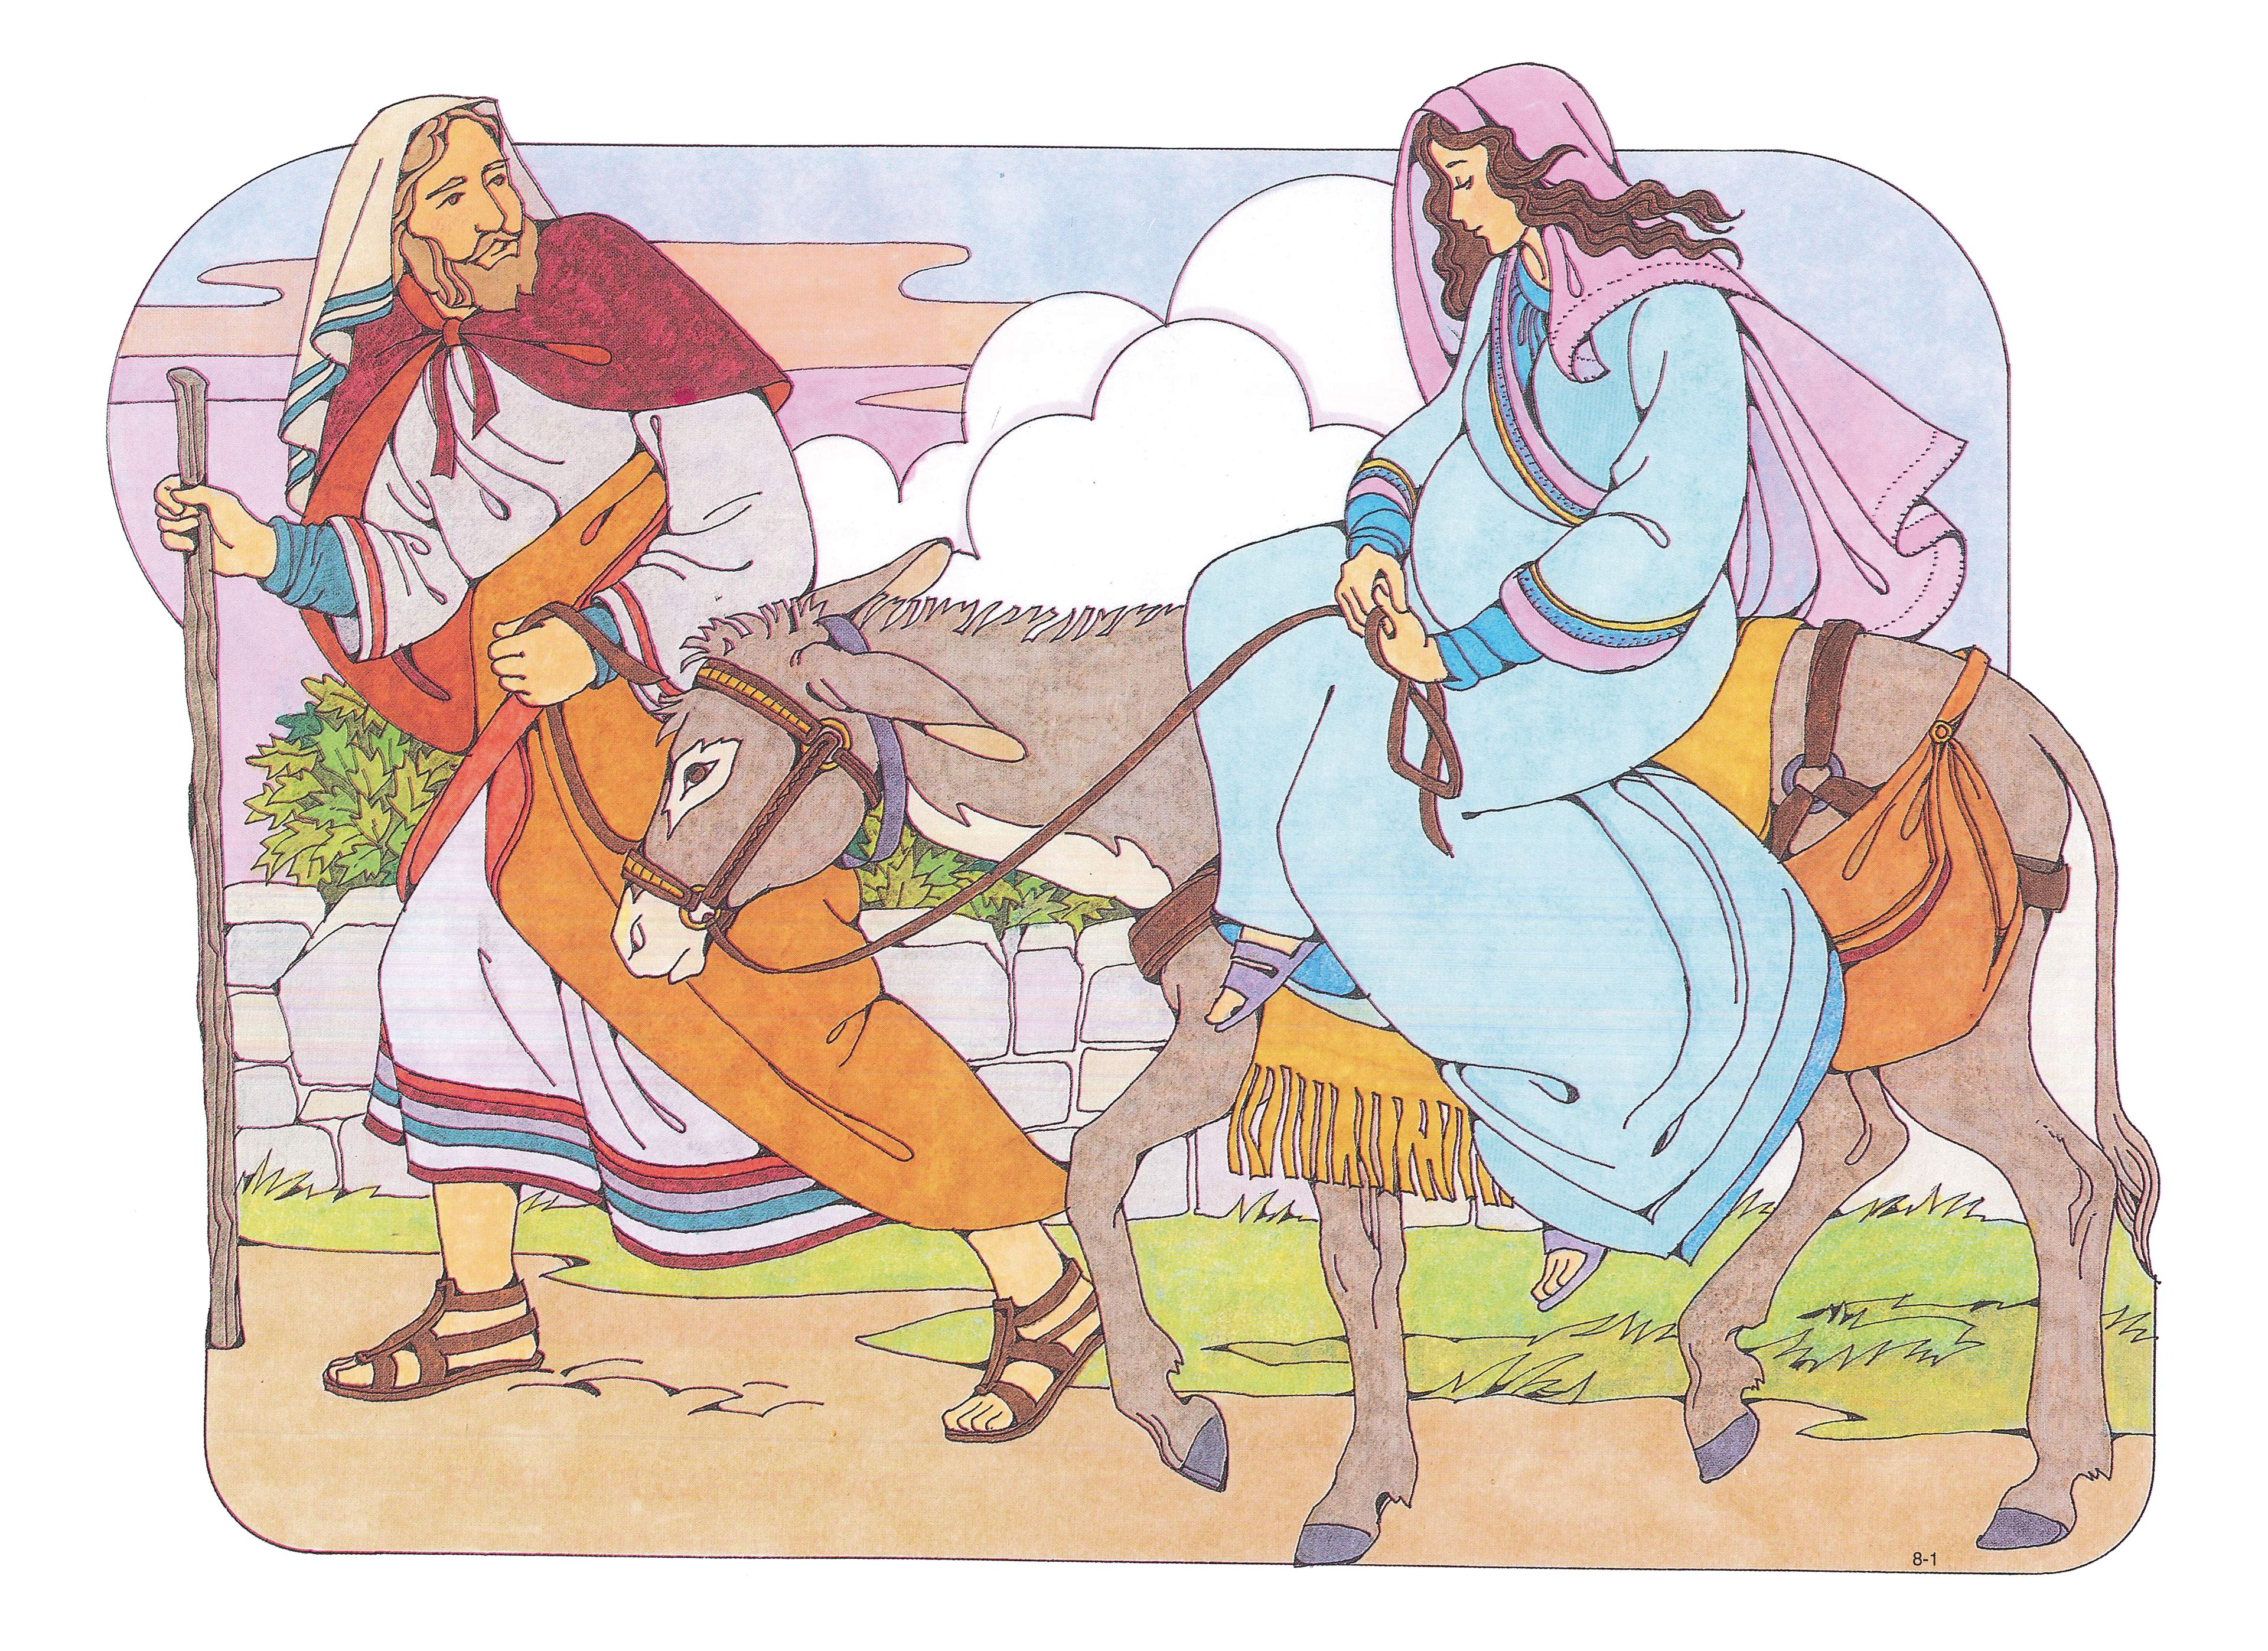 Primary Visual Aids: Cutout 8-1, Joseph and Mary, Who Are on a Donkey.